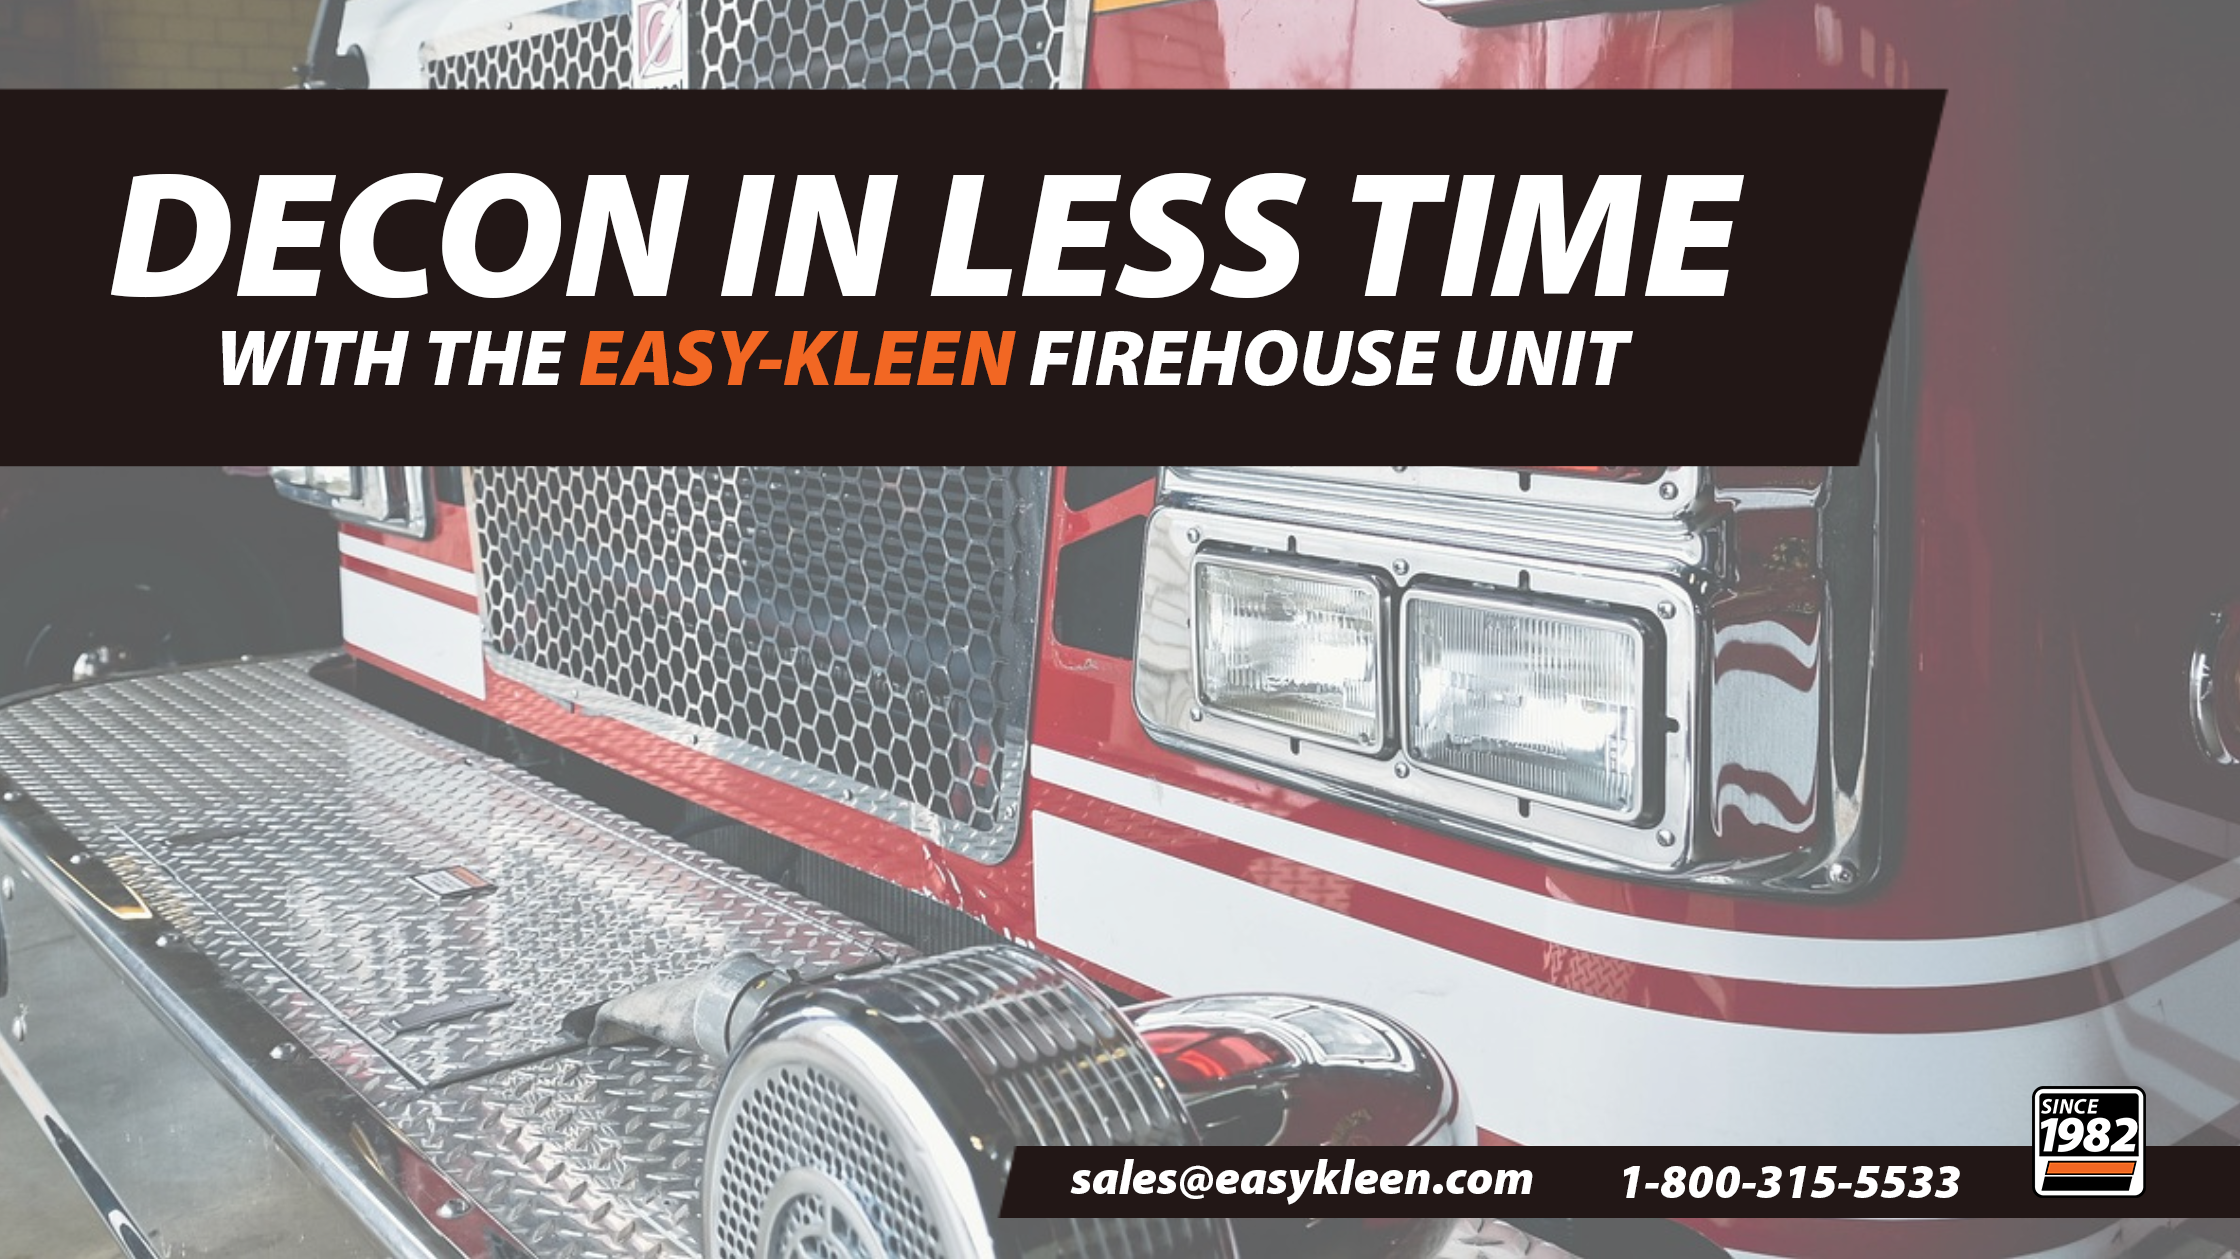 Decon In Less Time with the Easy-Kleen Firehouse Unit